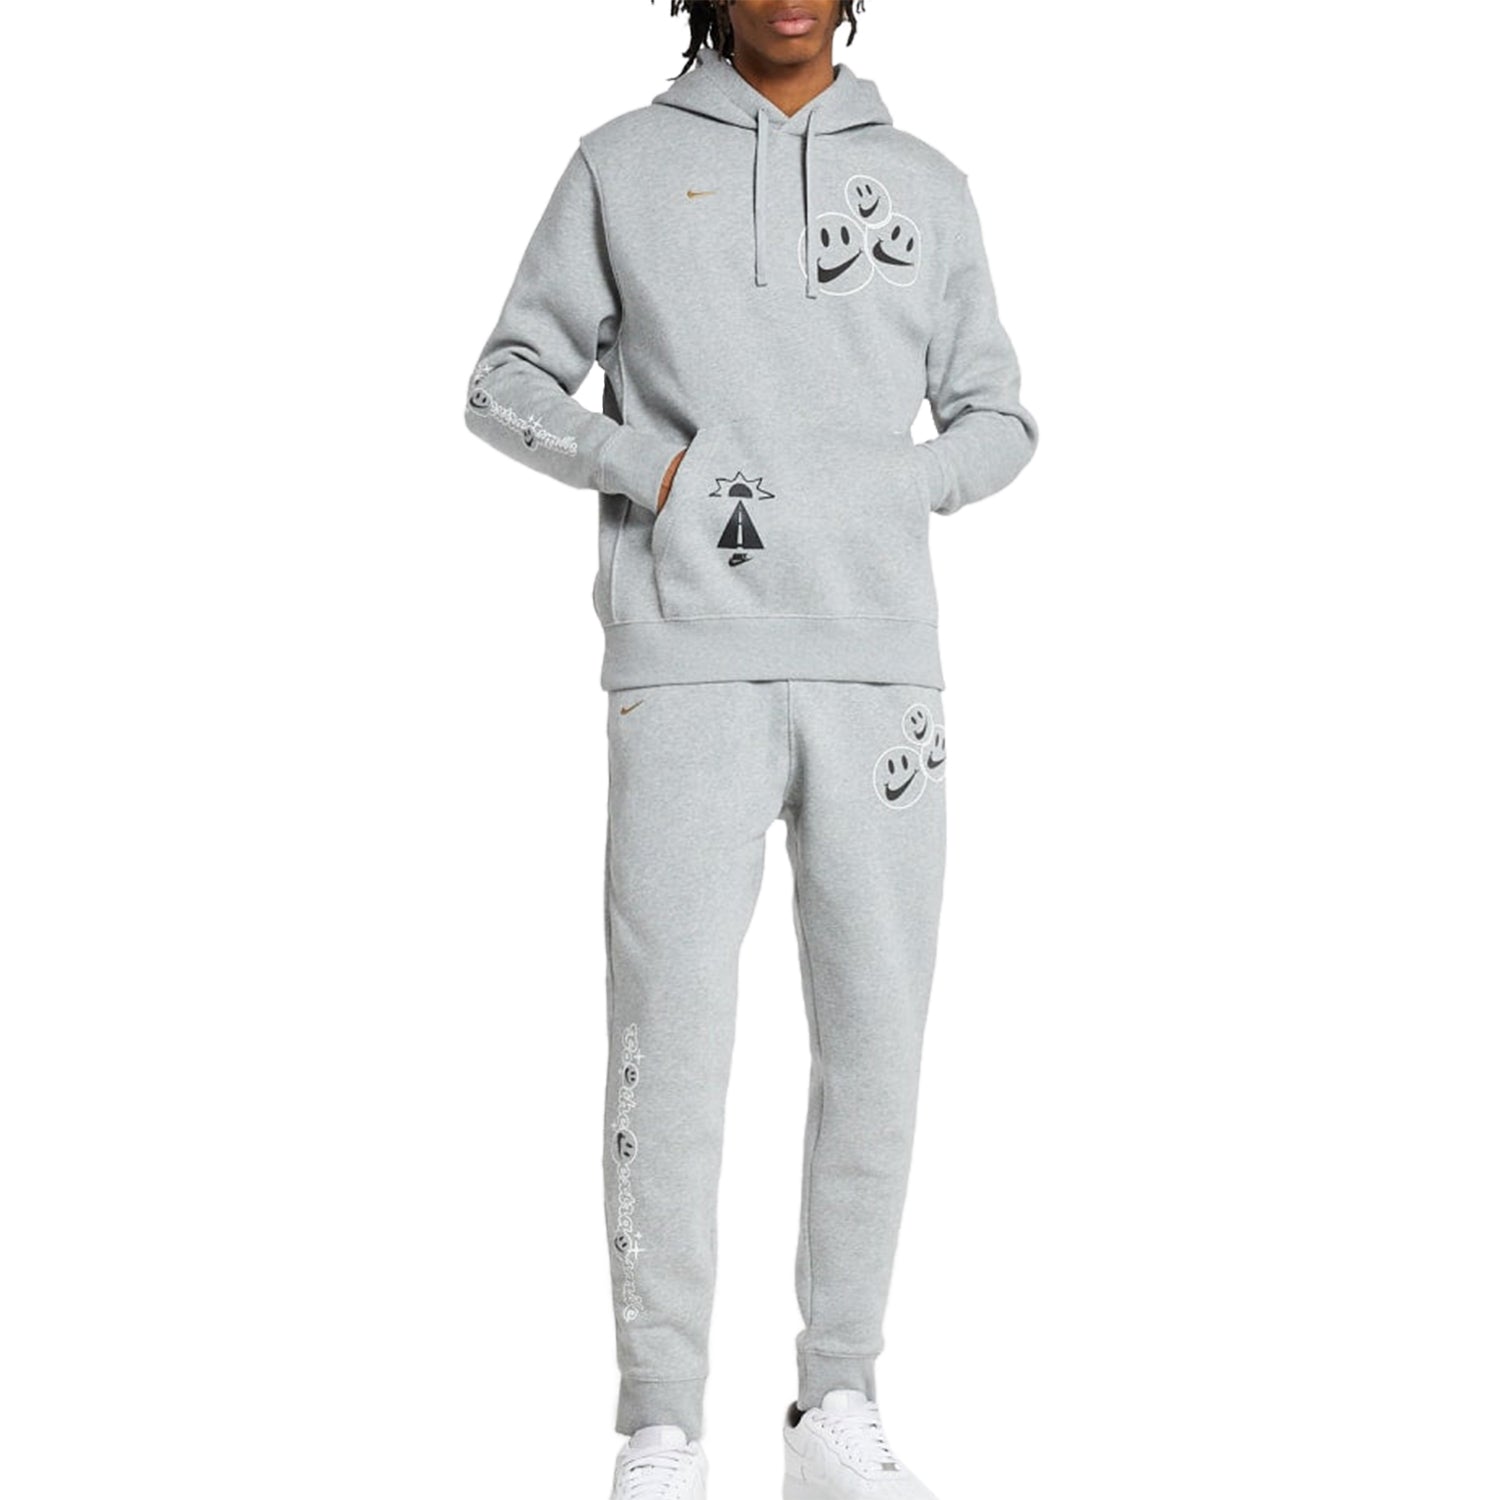 Nike Nsw Club Fleece Smile Pullover Hoodie Mens Style : Dq3520